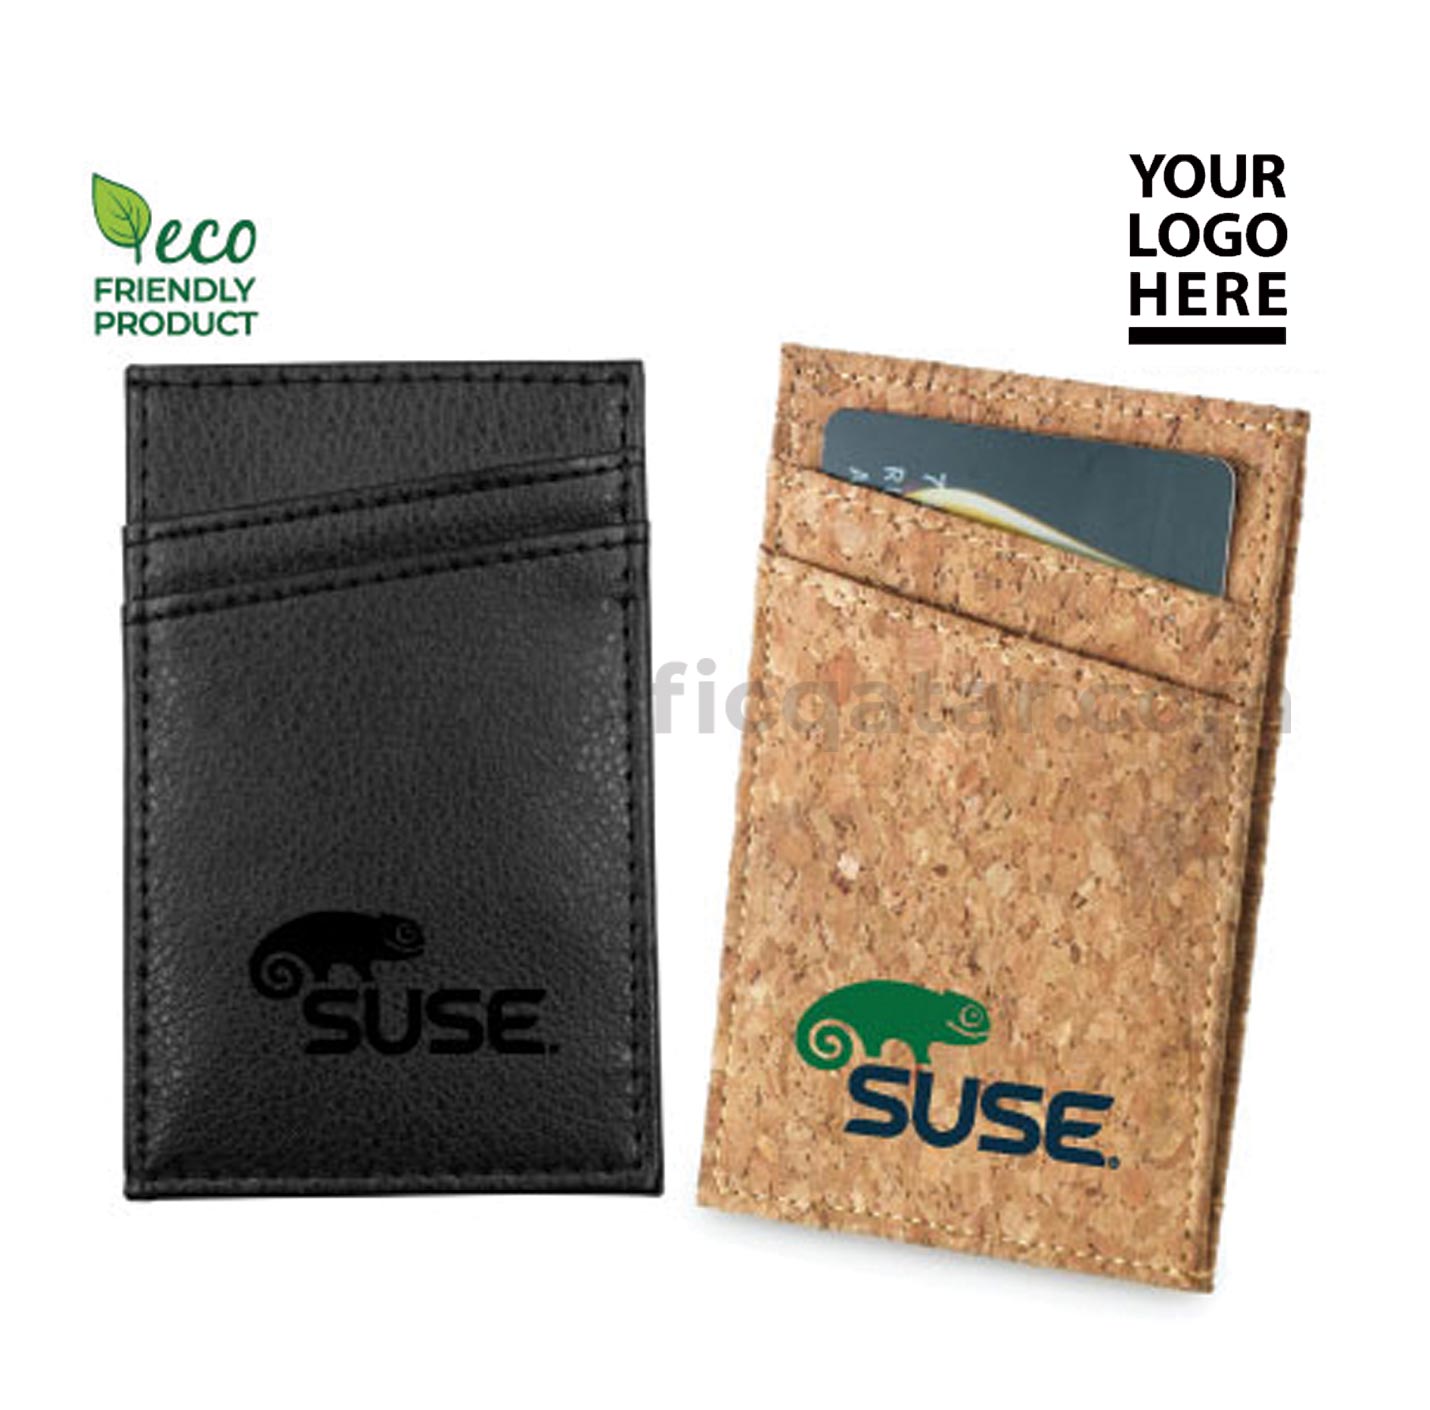 RFID Protected card holder